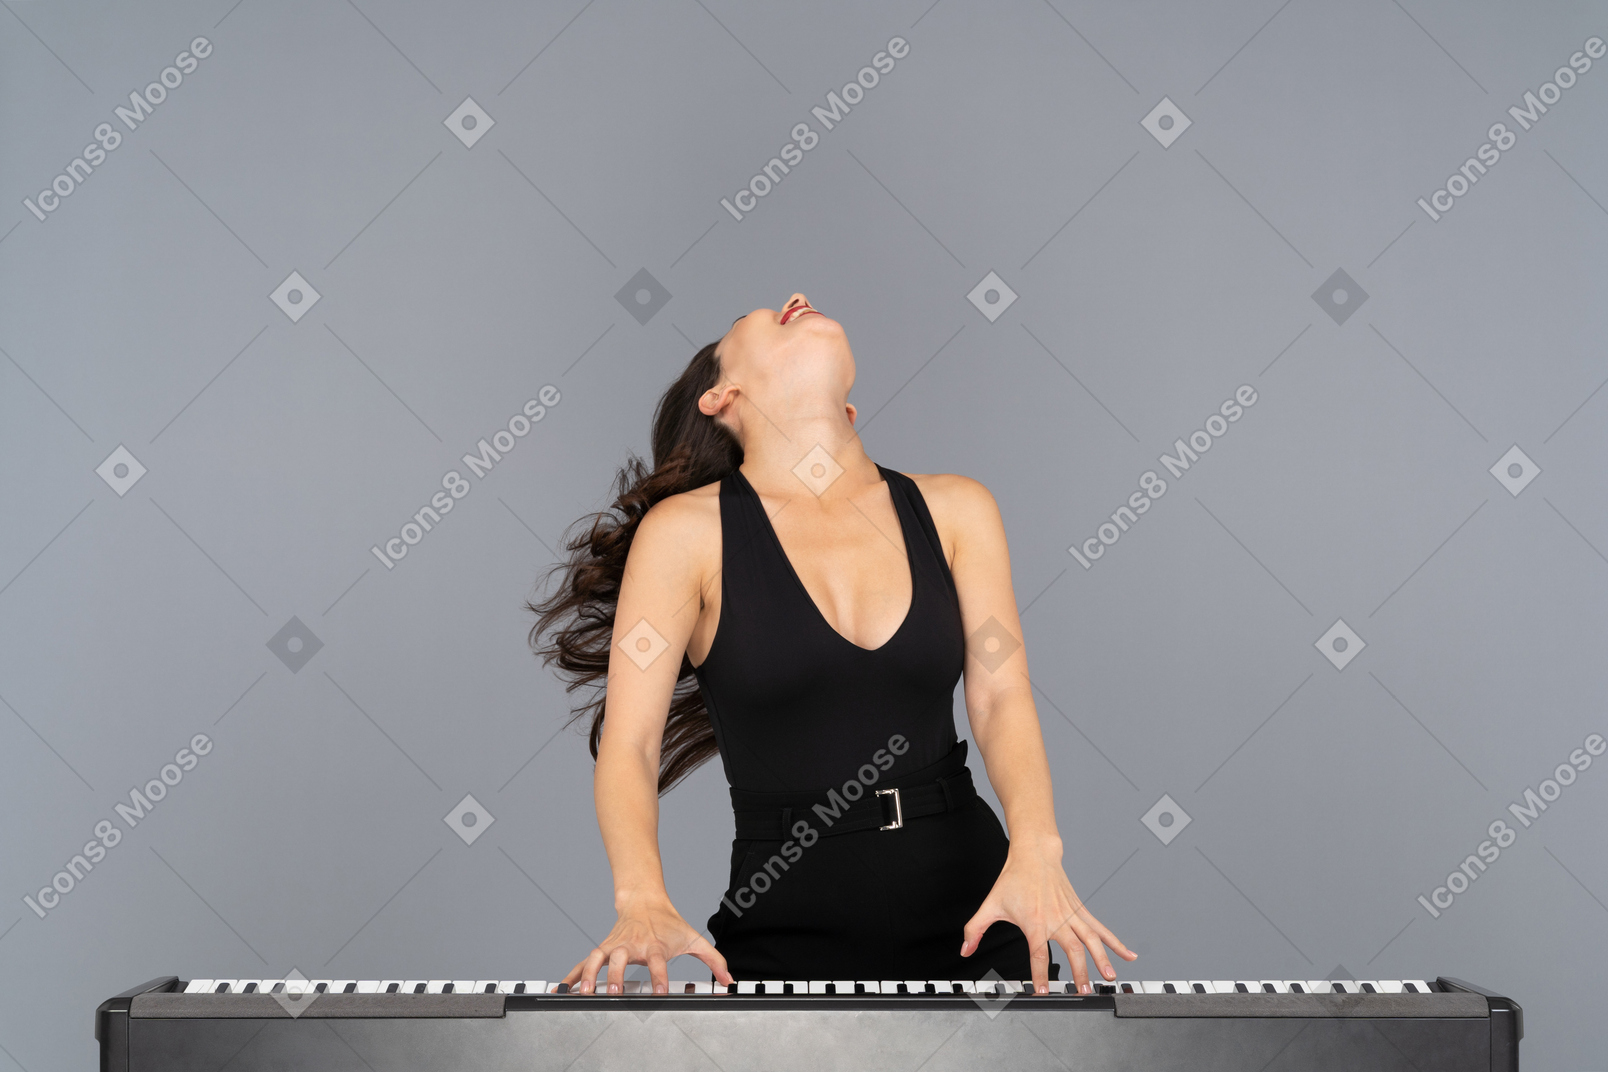 Woman bending her head back while playing a piano